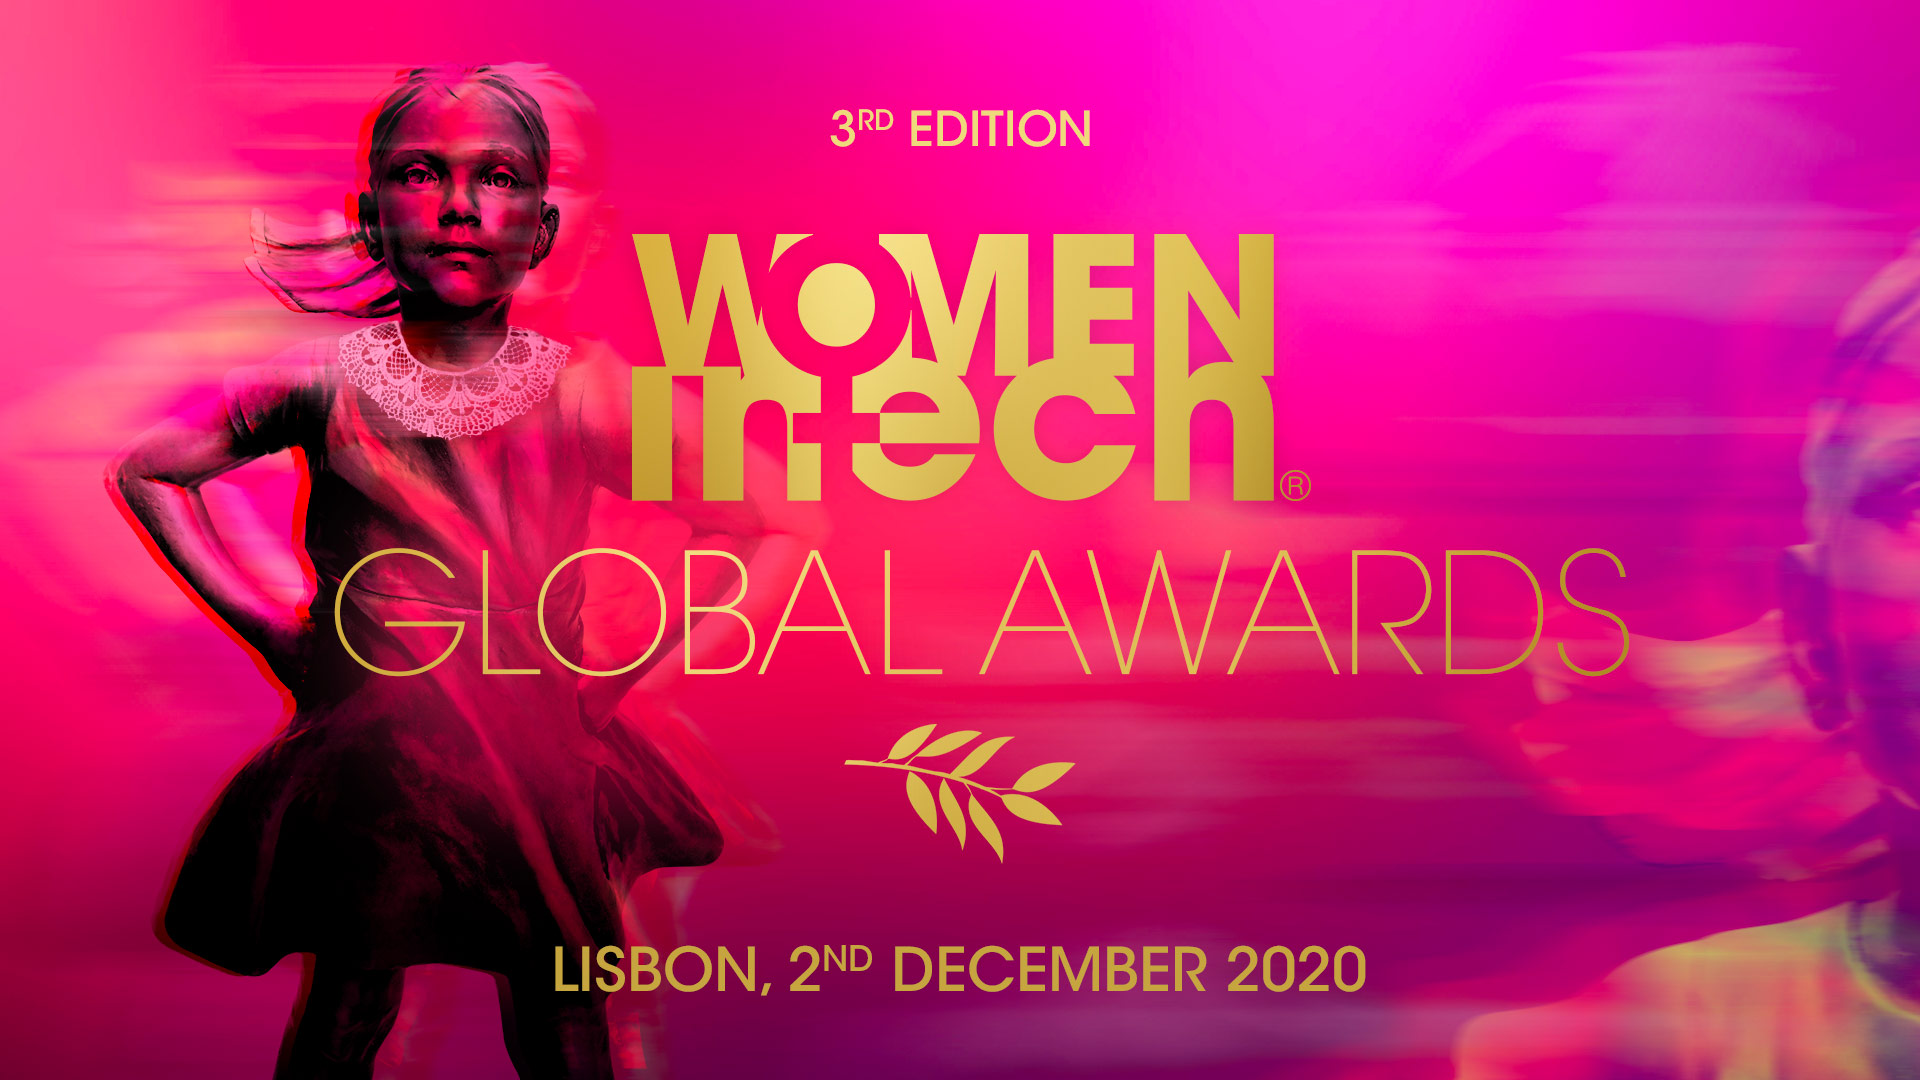 3rd edition of the Women in Tech Global Awards